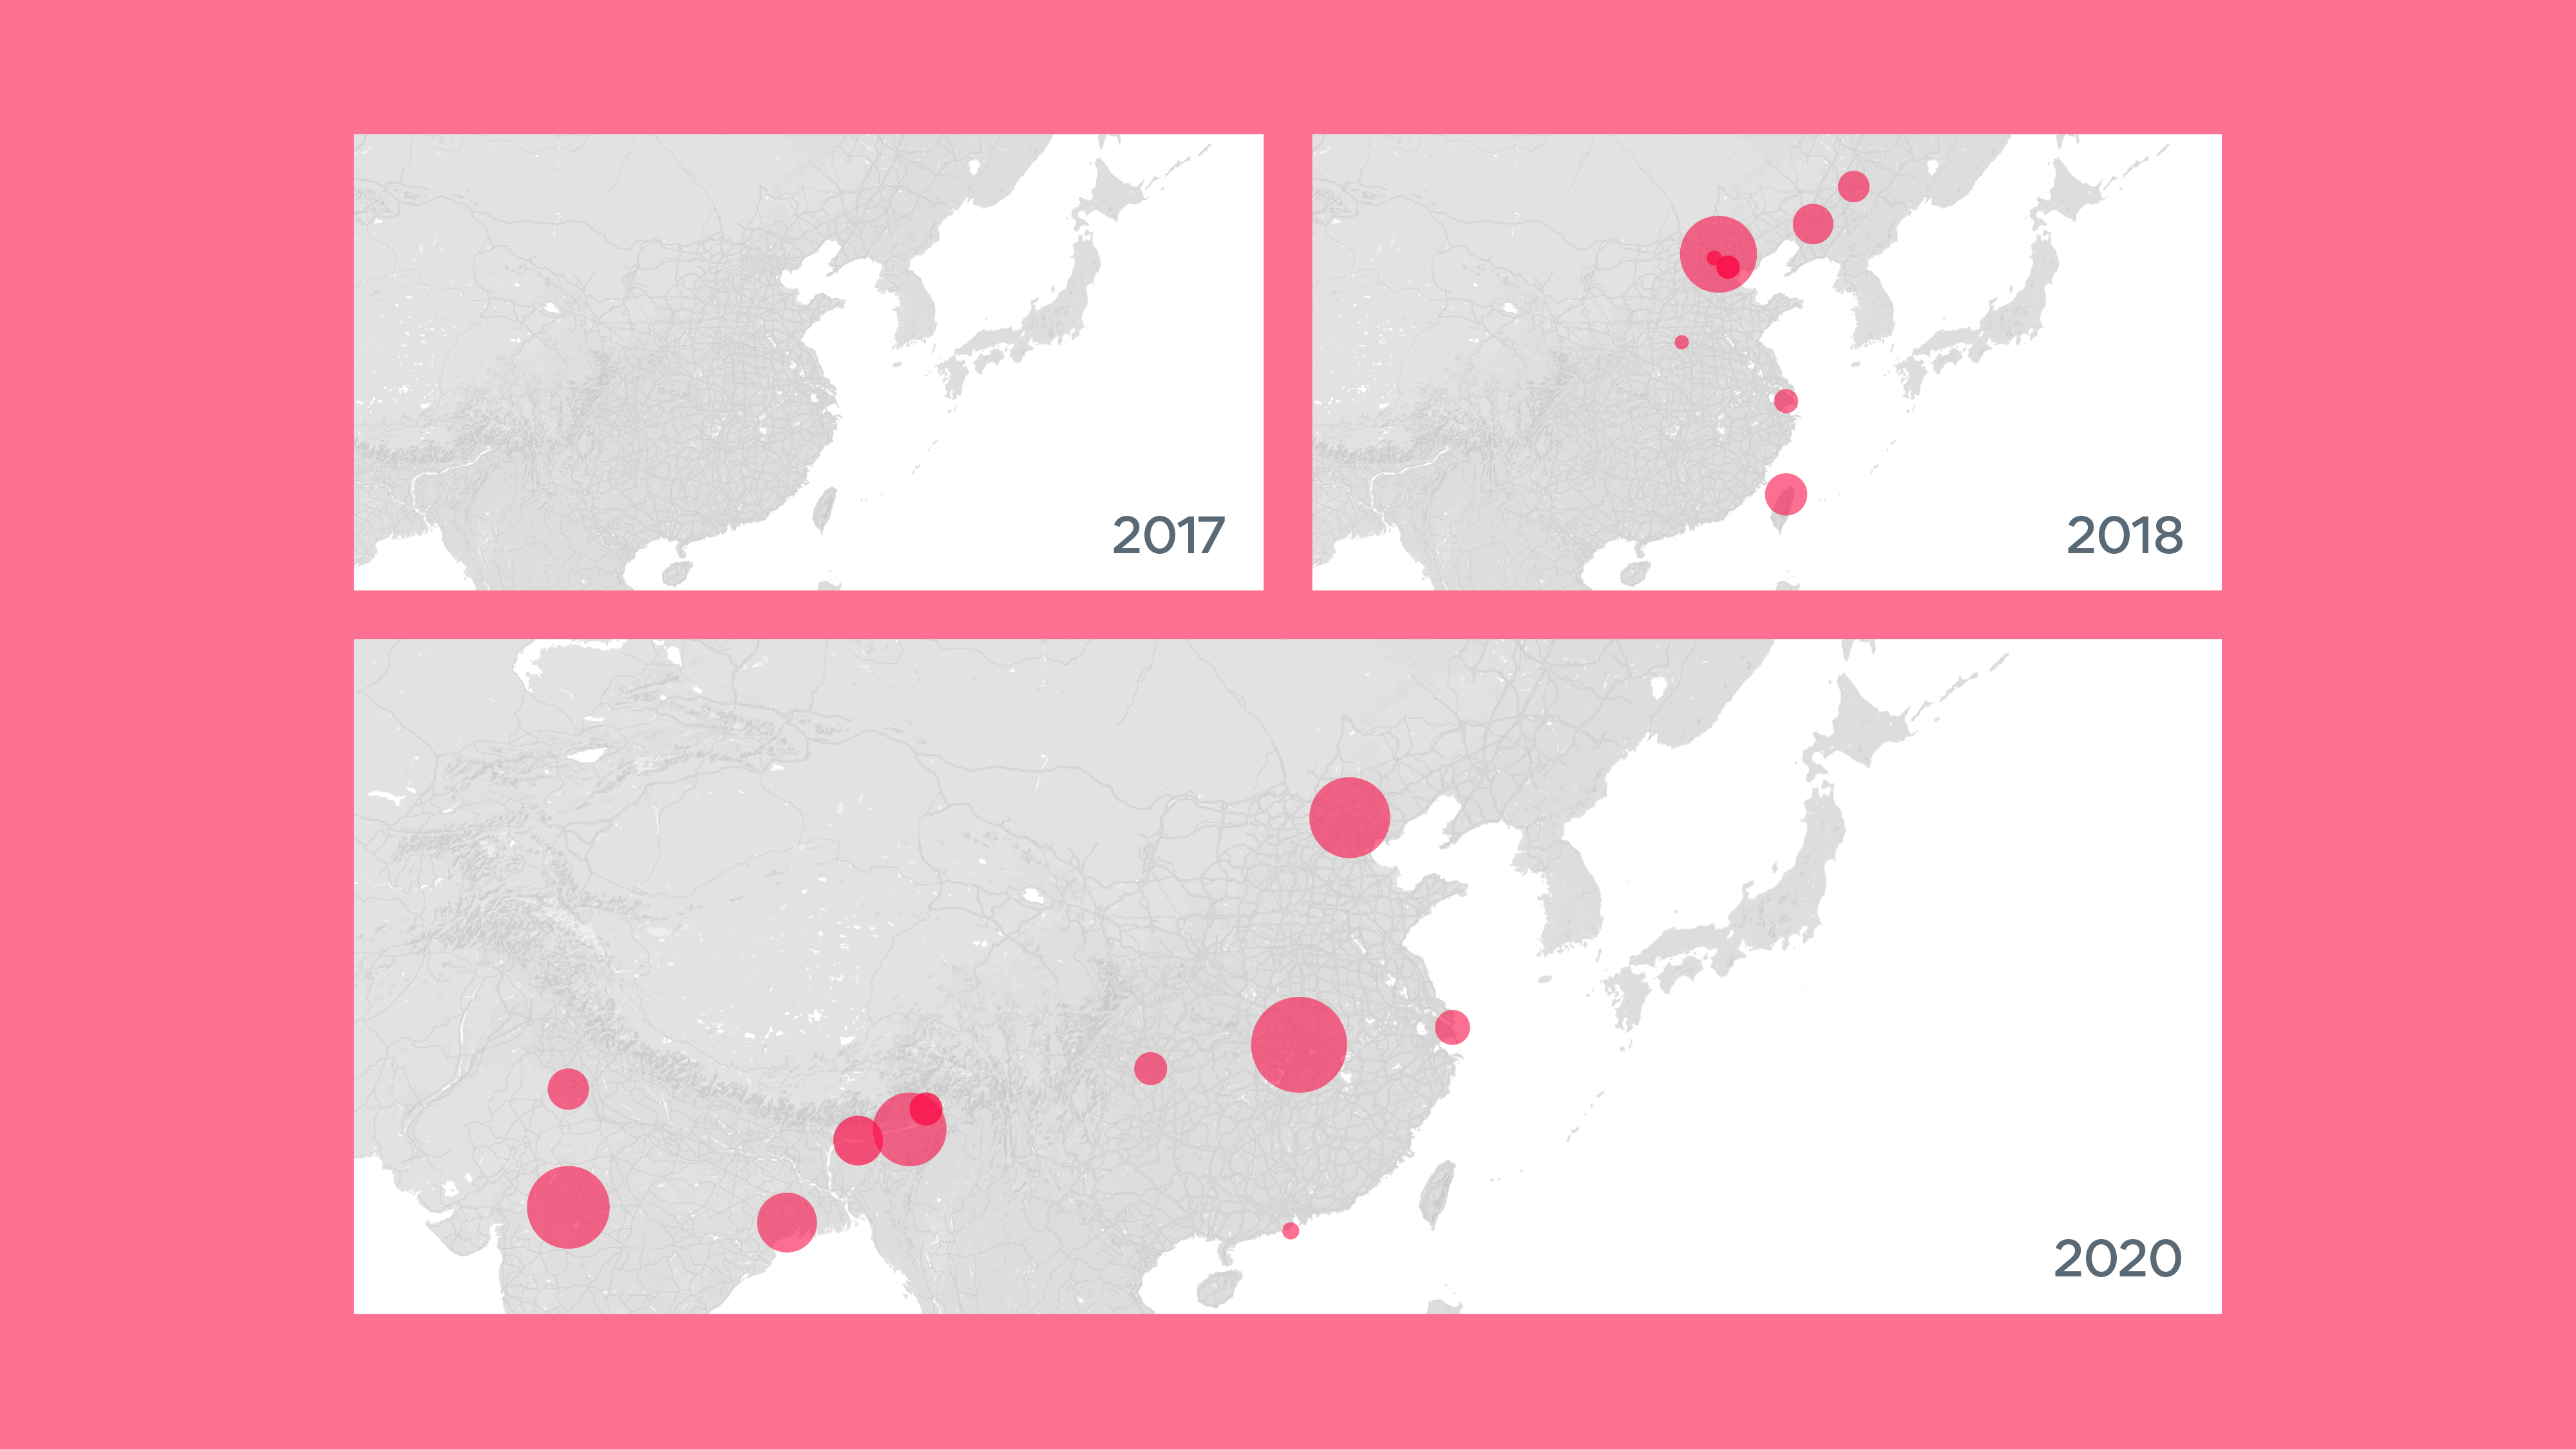 Three maps of China highlight the spread of African Swine Flu between 2017 and 2020.